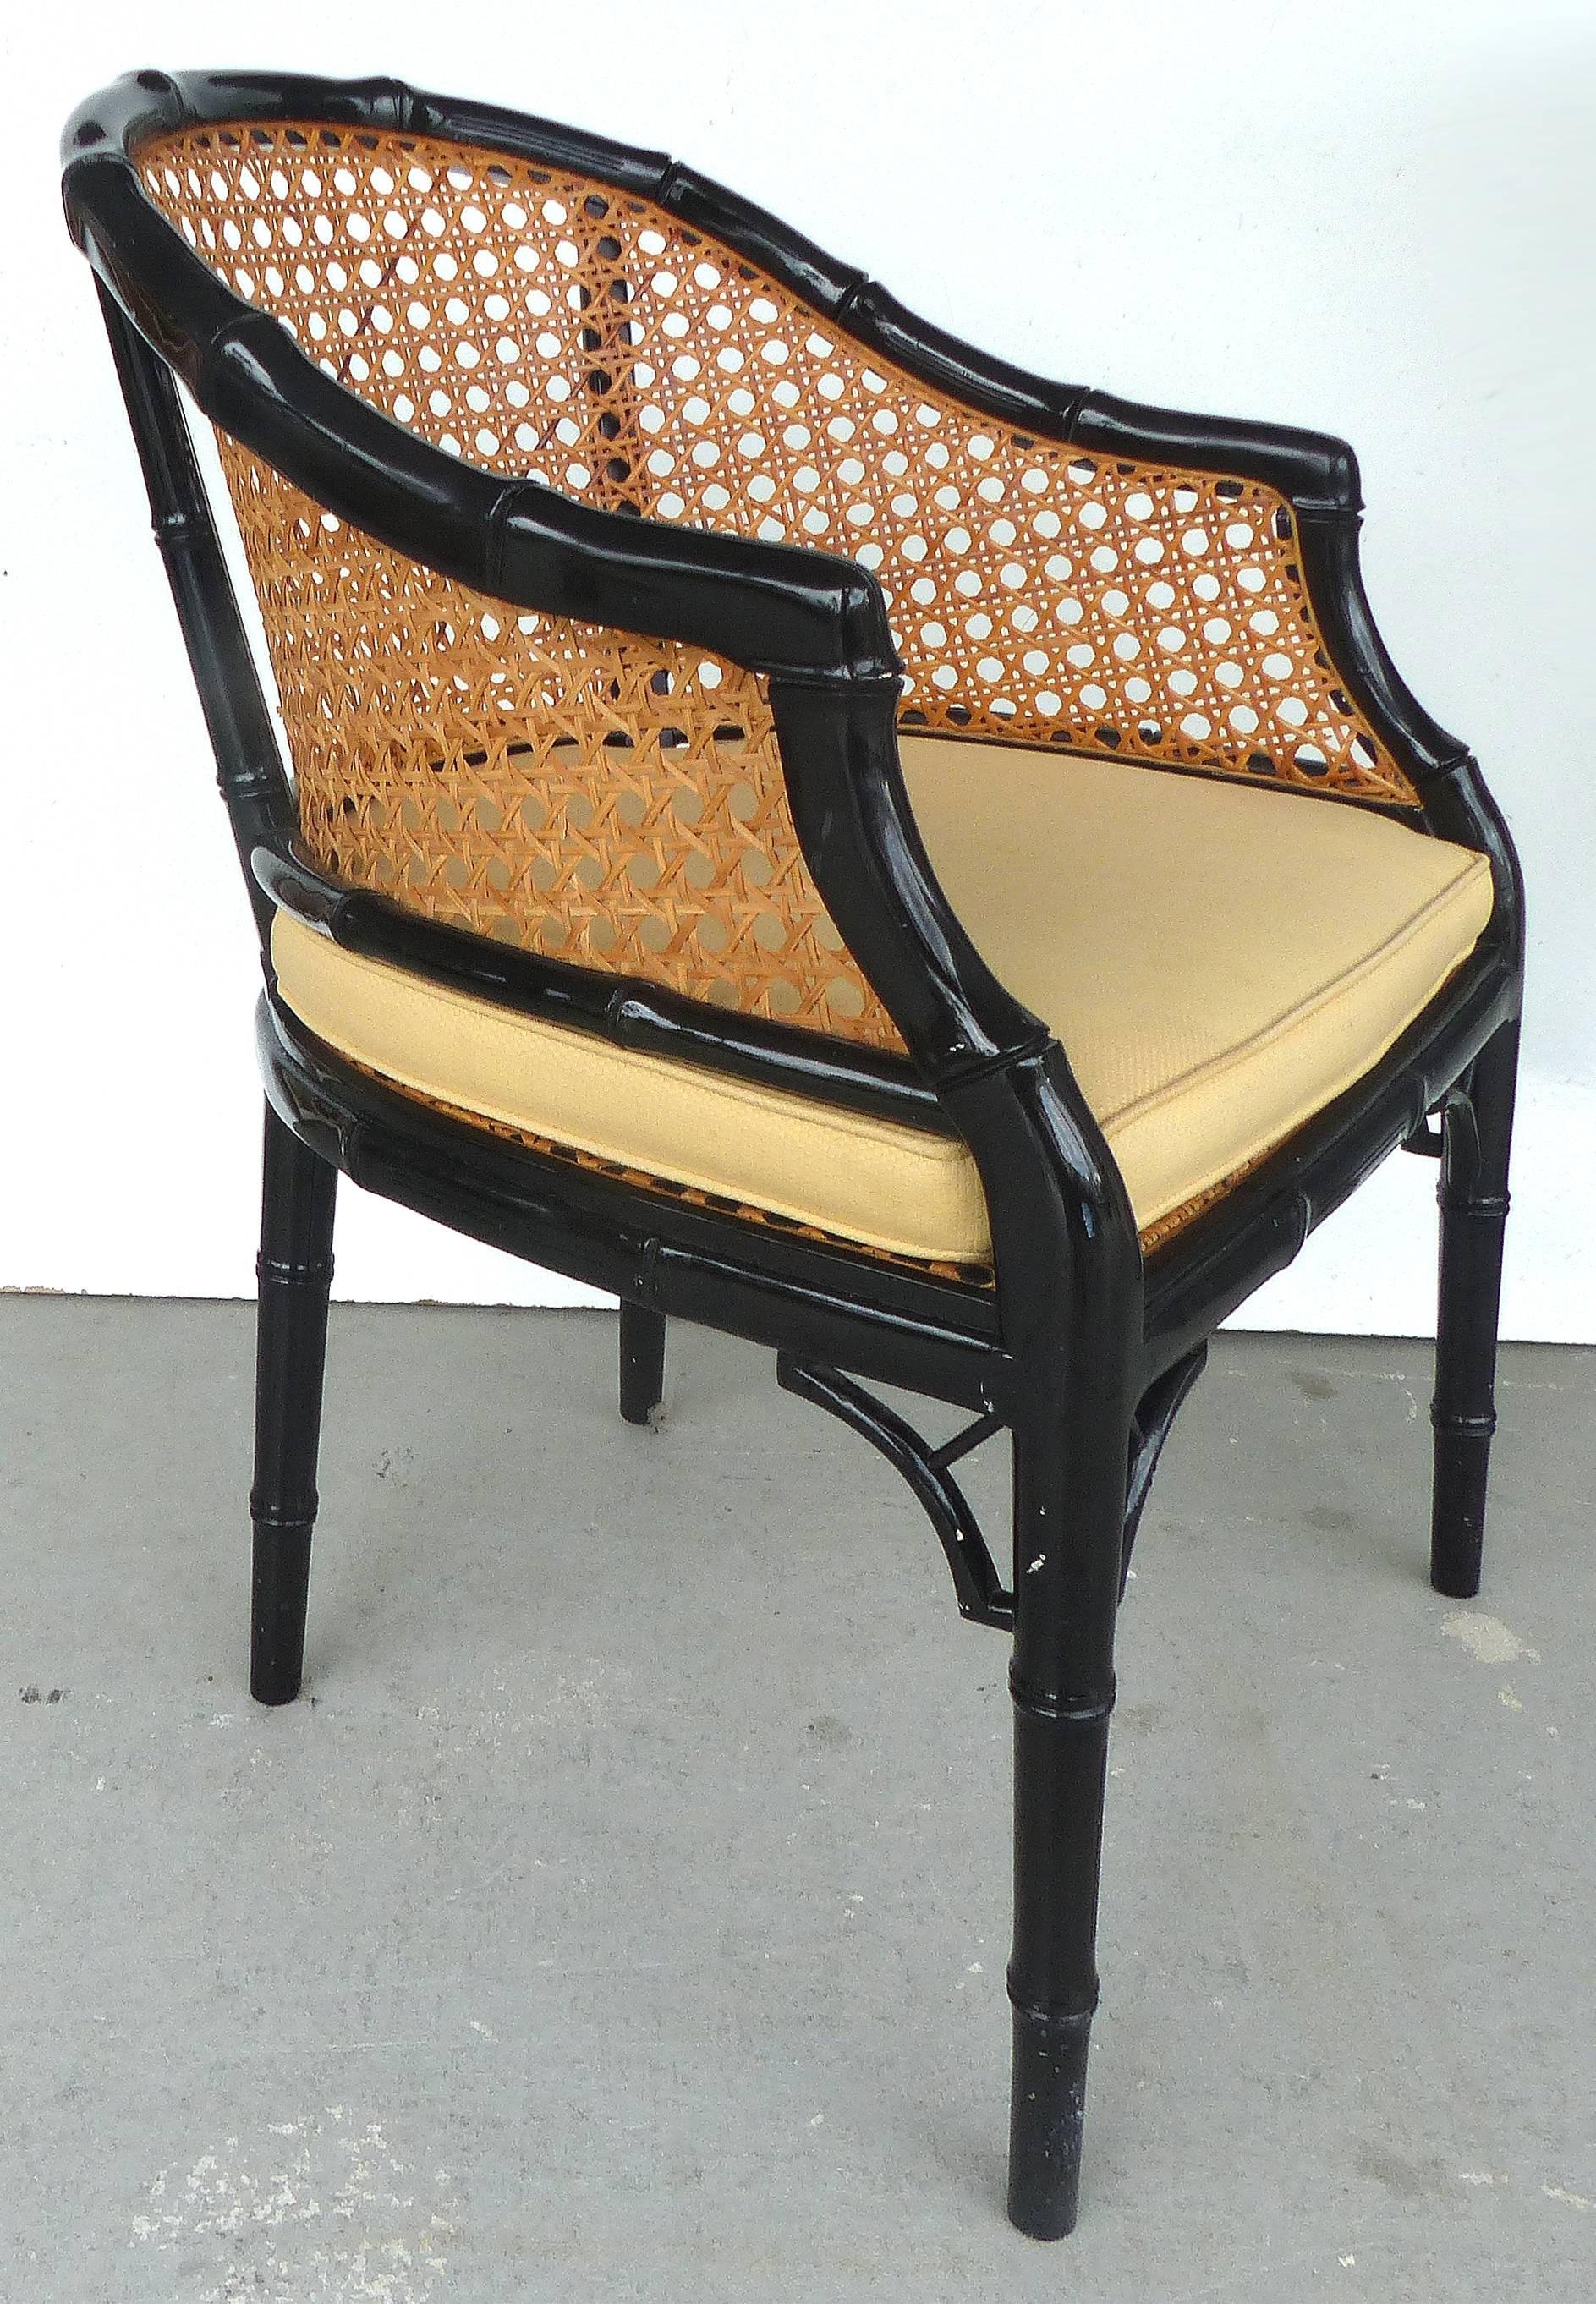 Caning Vintage Pair of Lacquered Faux-Bamboo and Cane Chairs